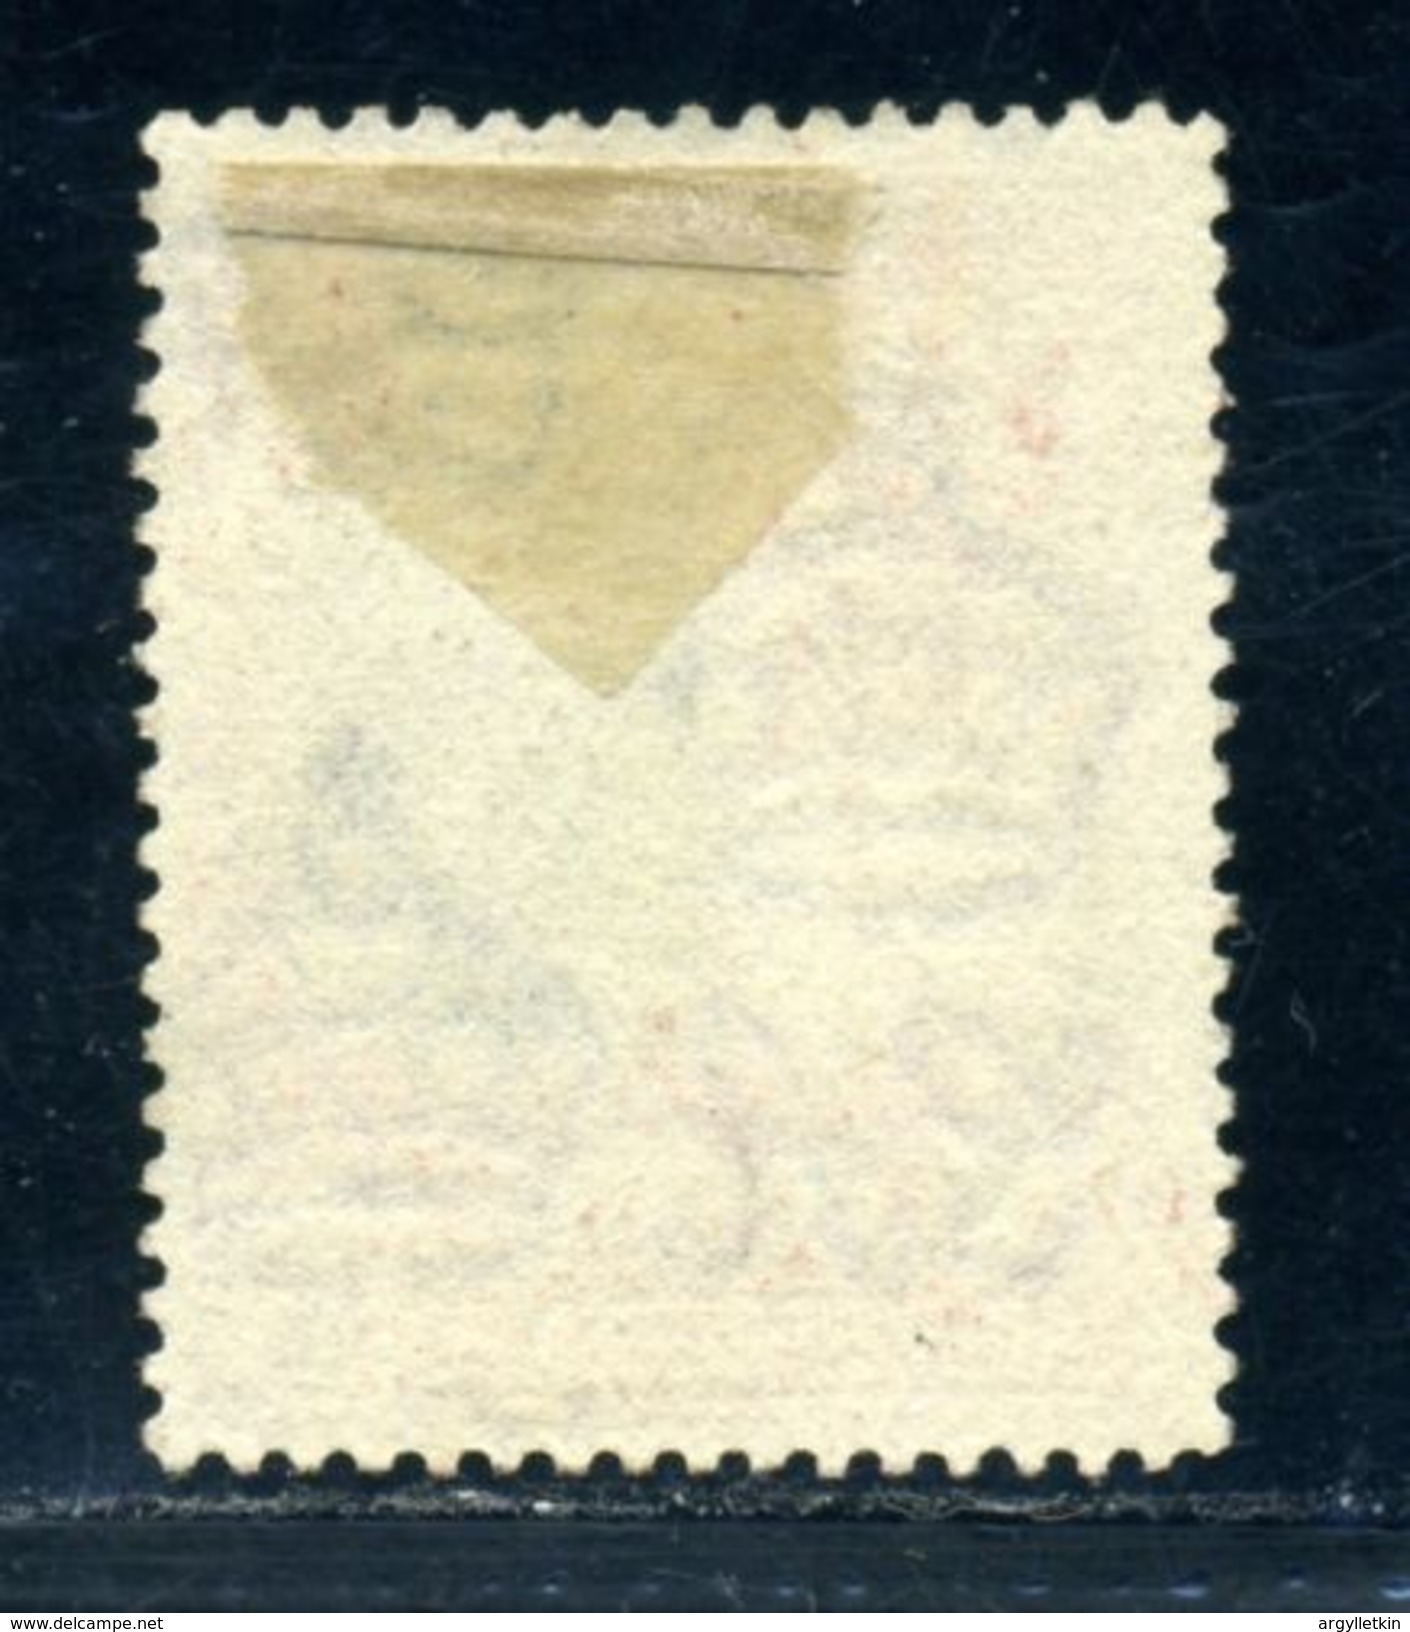 GAMBIA RARE POSTMARKS KG5 AND KG6 - Gambia (...-1964)